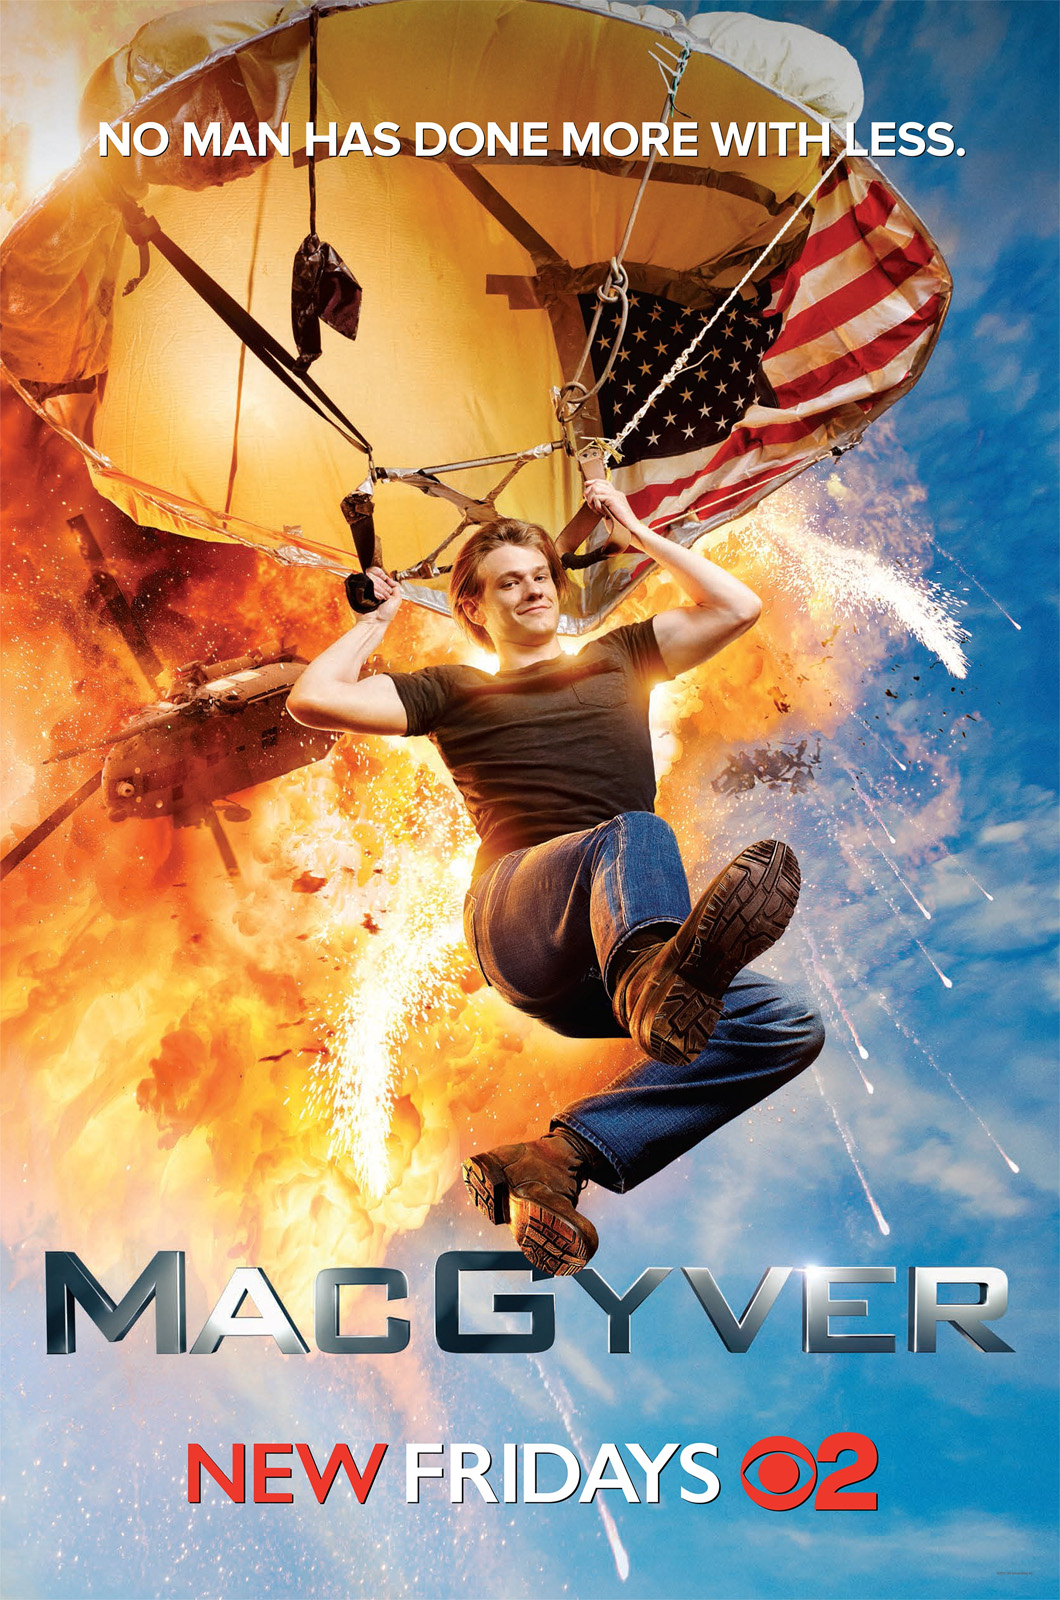 MacGyver (2016) S01E21 FINAL FRENCH HDTV